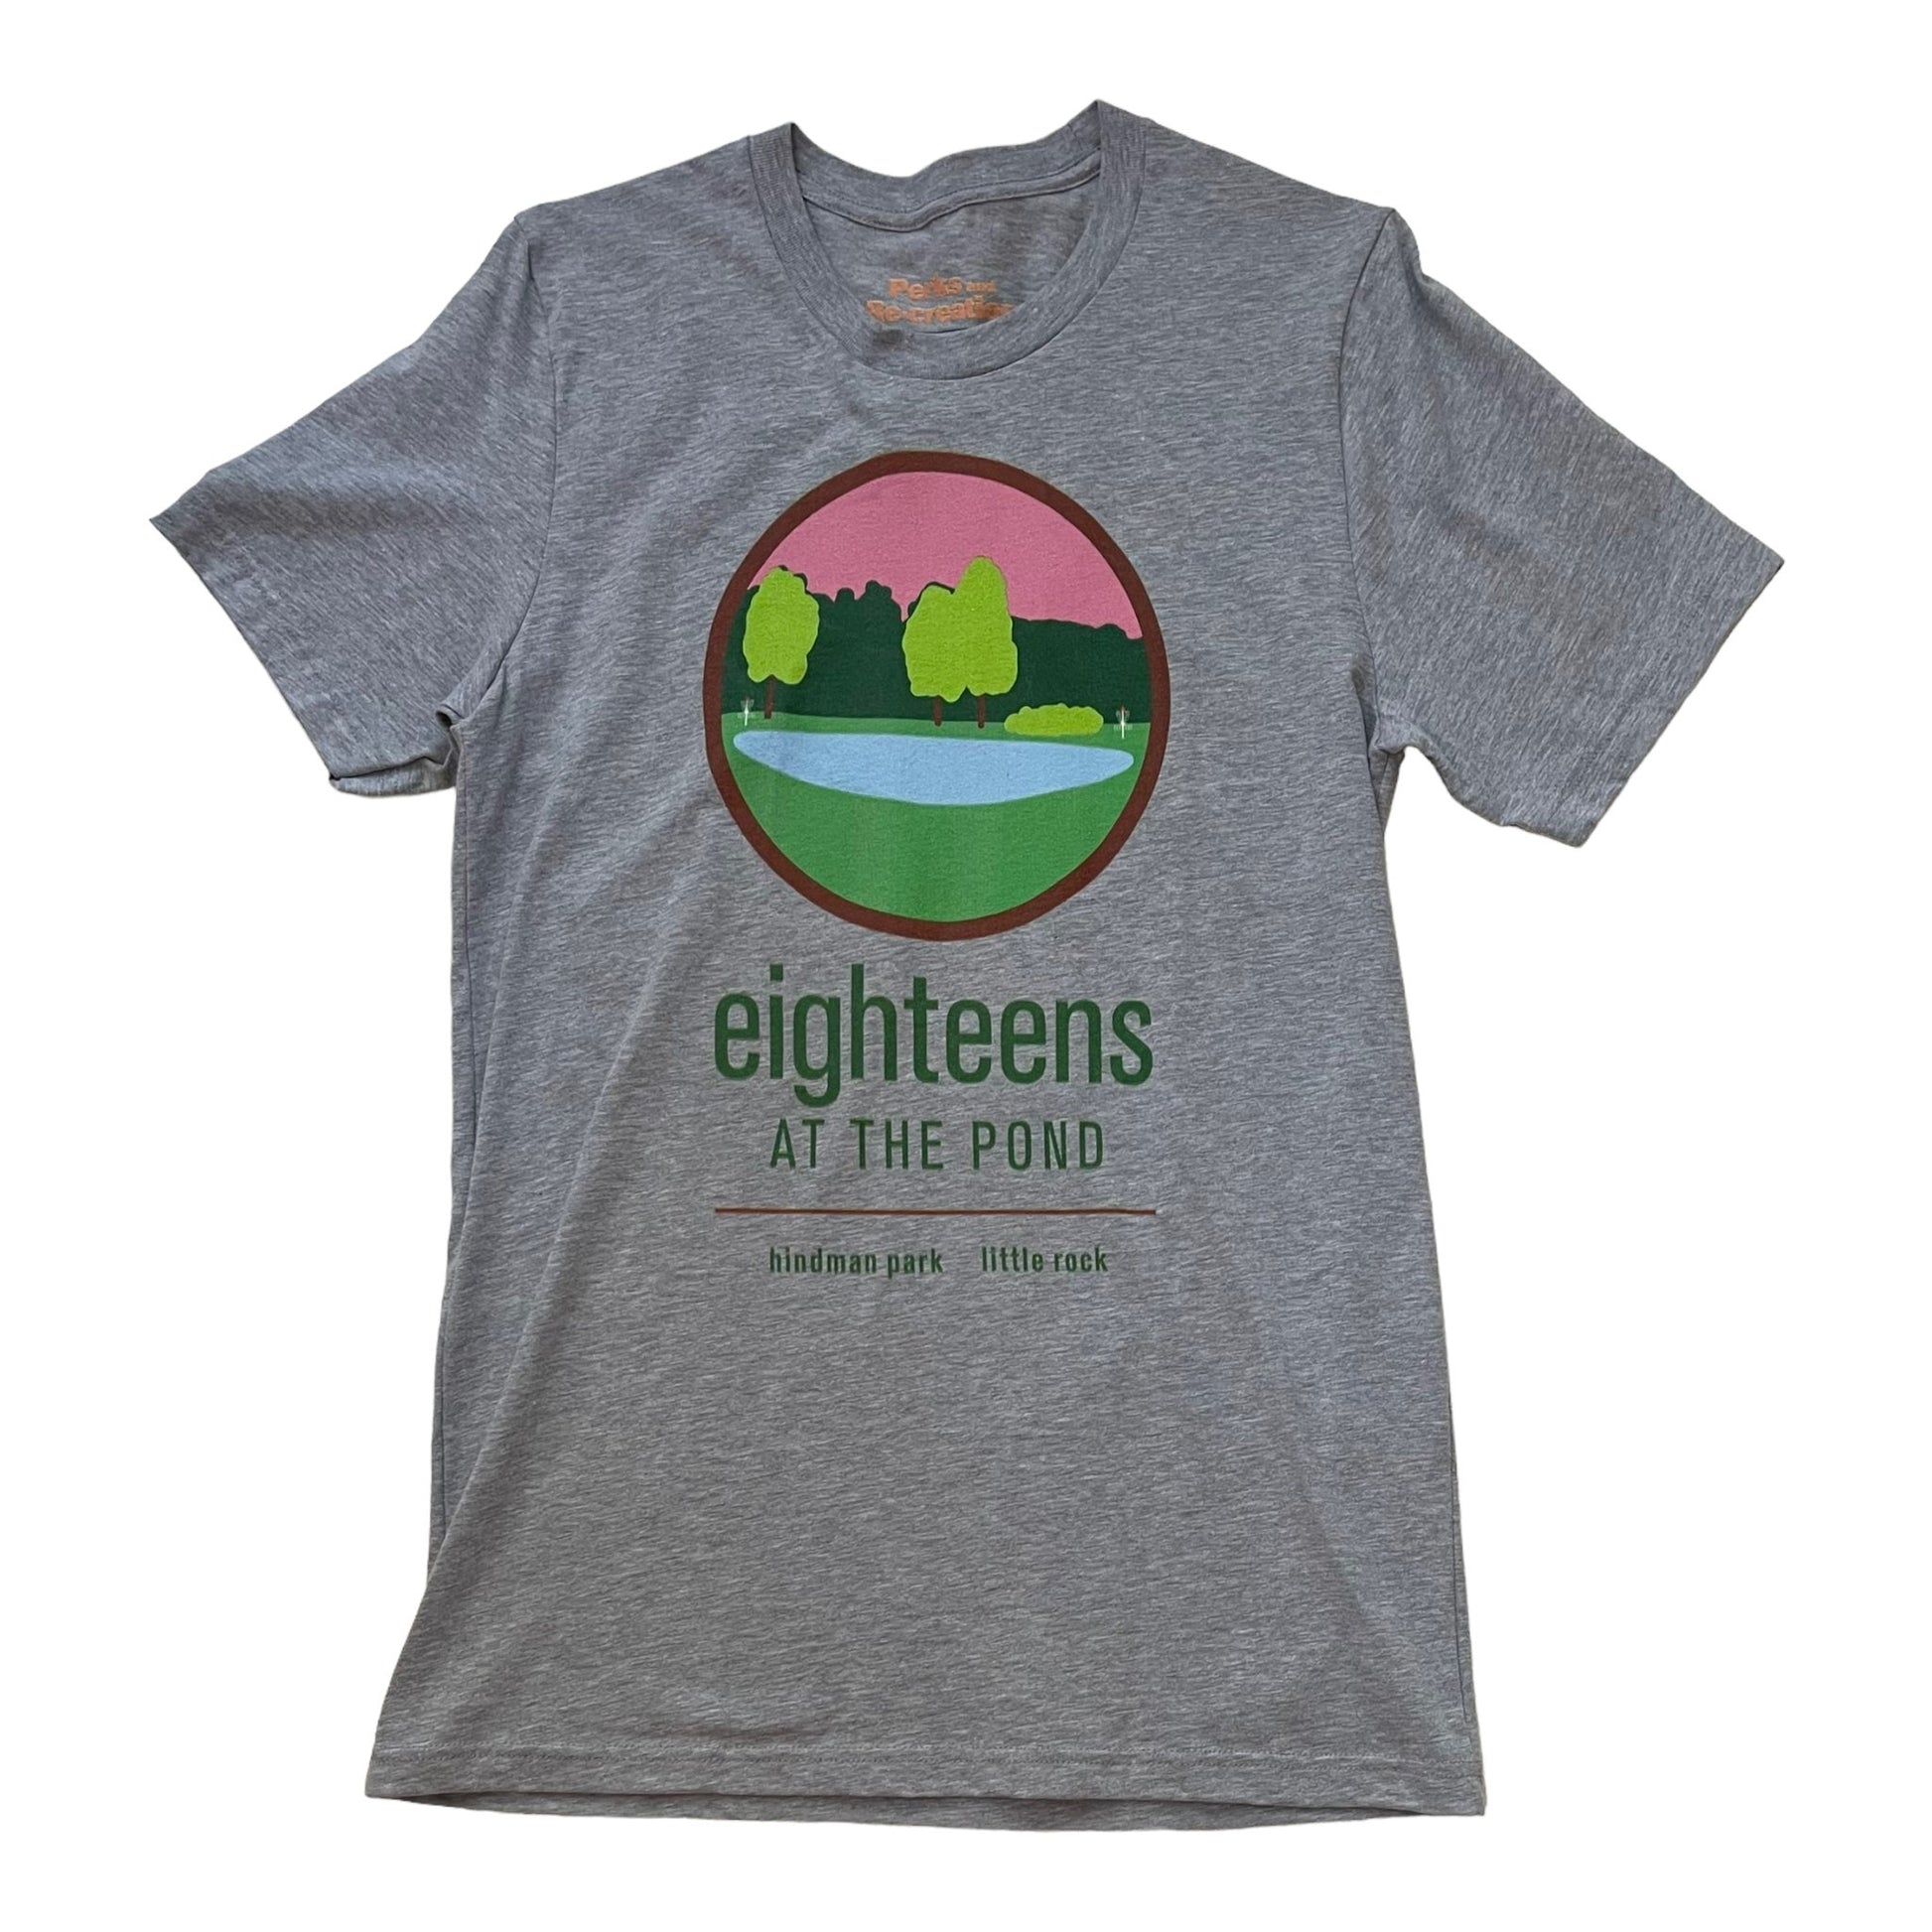 Perks and Re-creation Eighteens at the Pond Tee Disc Golf